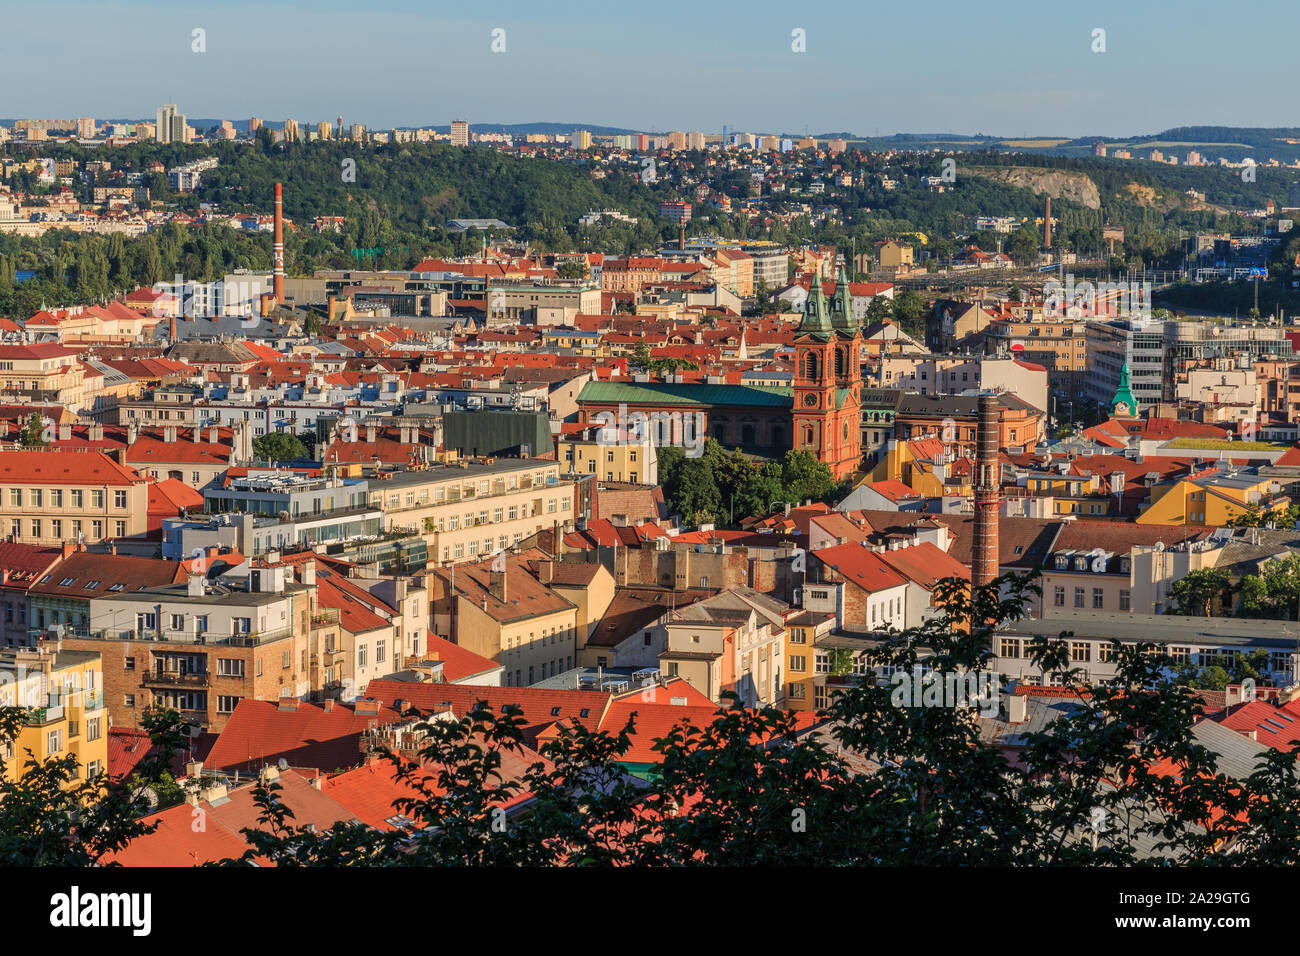 Panoramic view over the rooftops and historical buildings of Prague the capital of Czechia with St. Wenceslas on Zderaz in a sunny day with blue sky Stock Photo